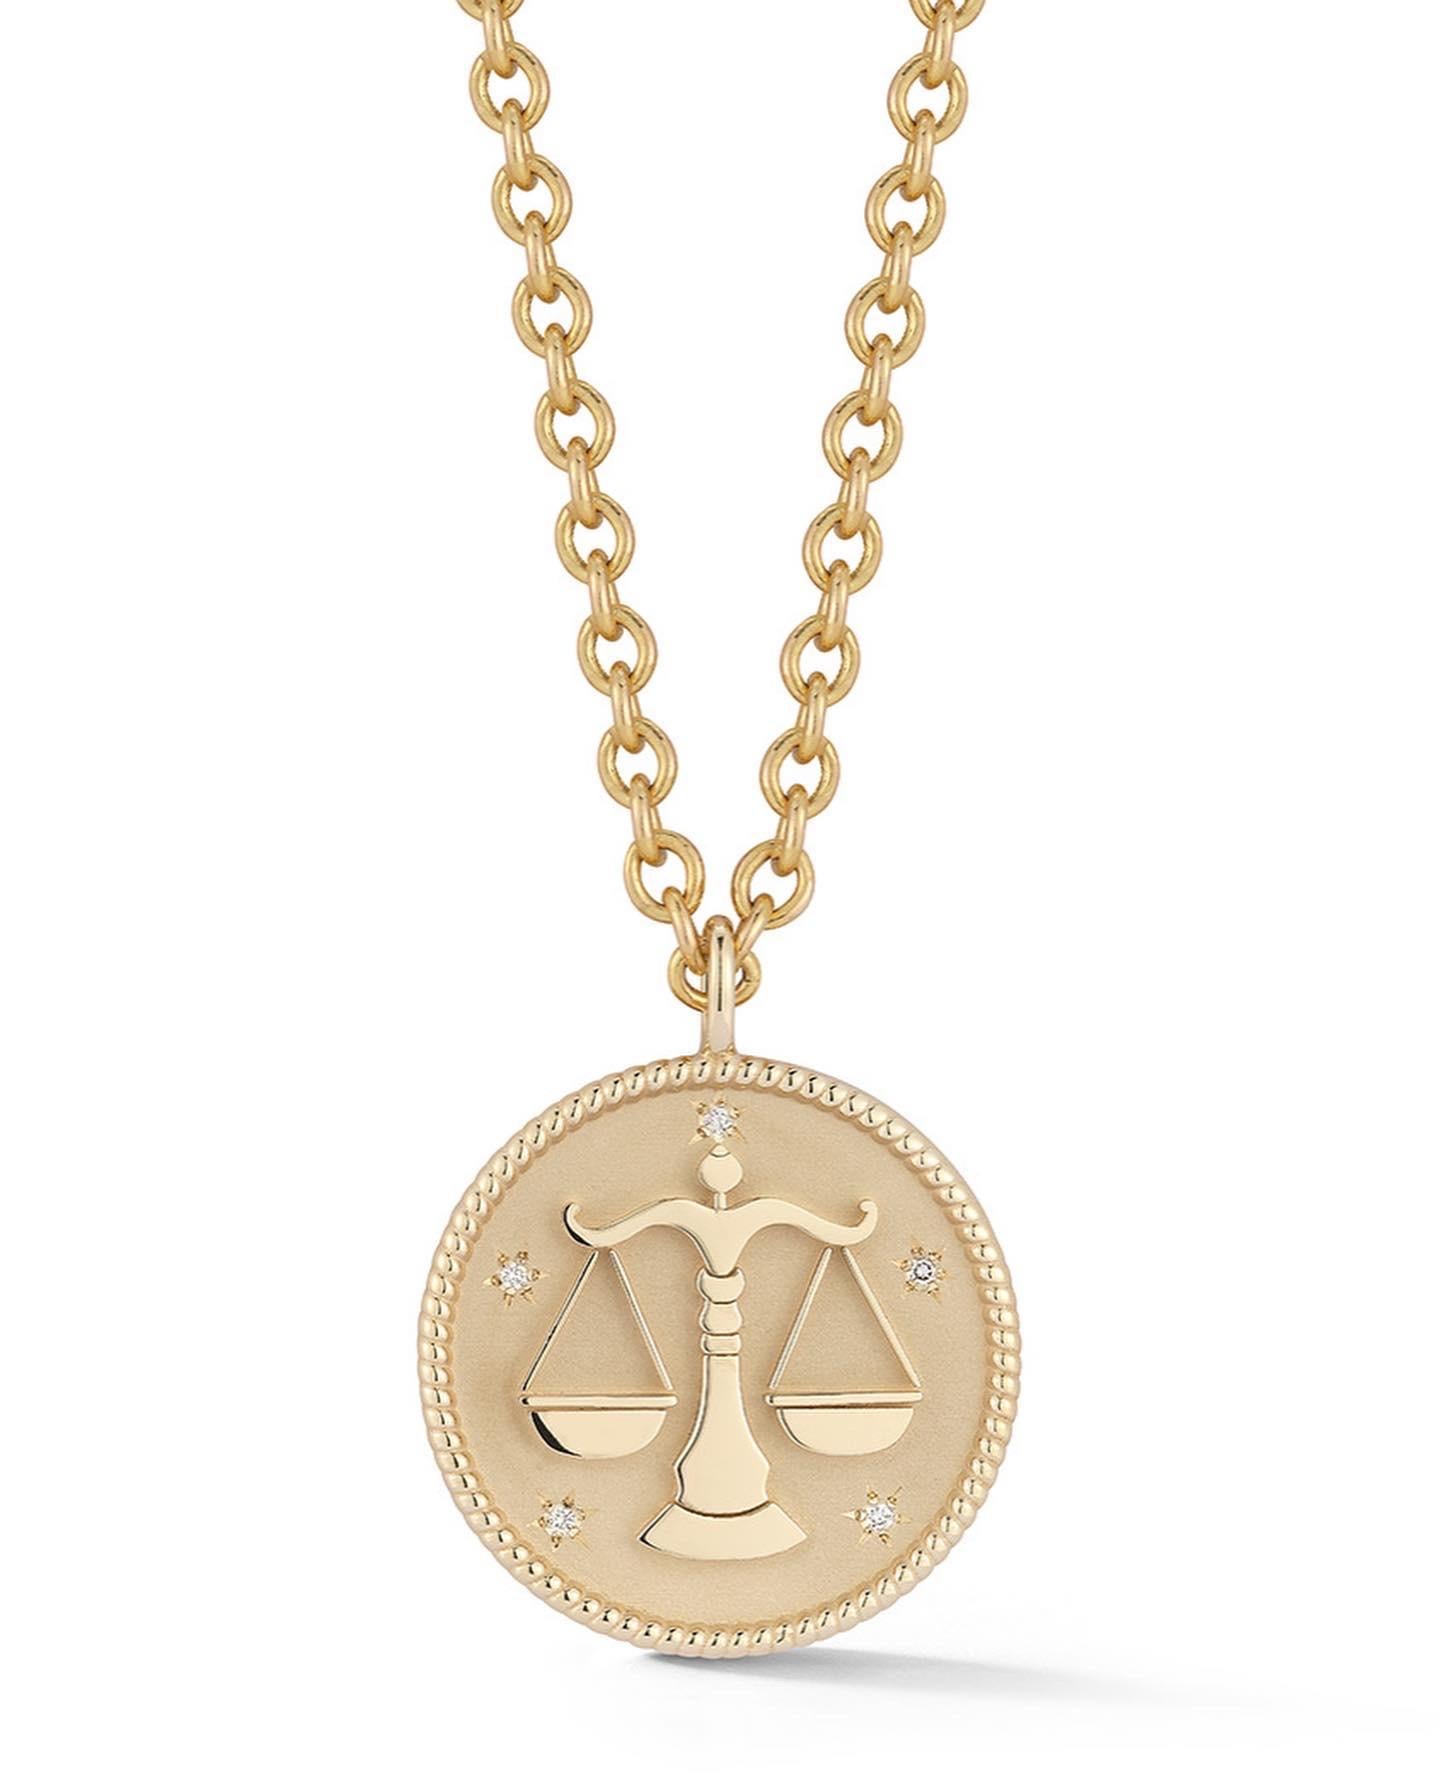 Women's or Men's Garland Collection Diamond and Gold Virgo Zodiac Medallion For Sale